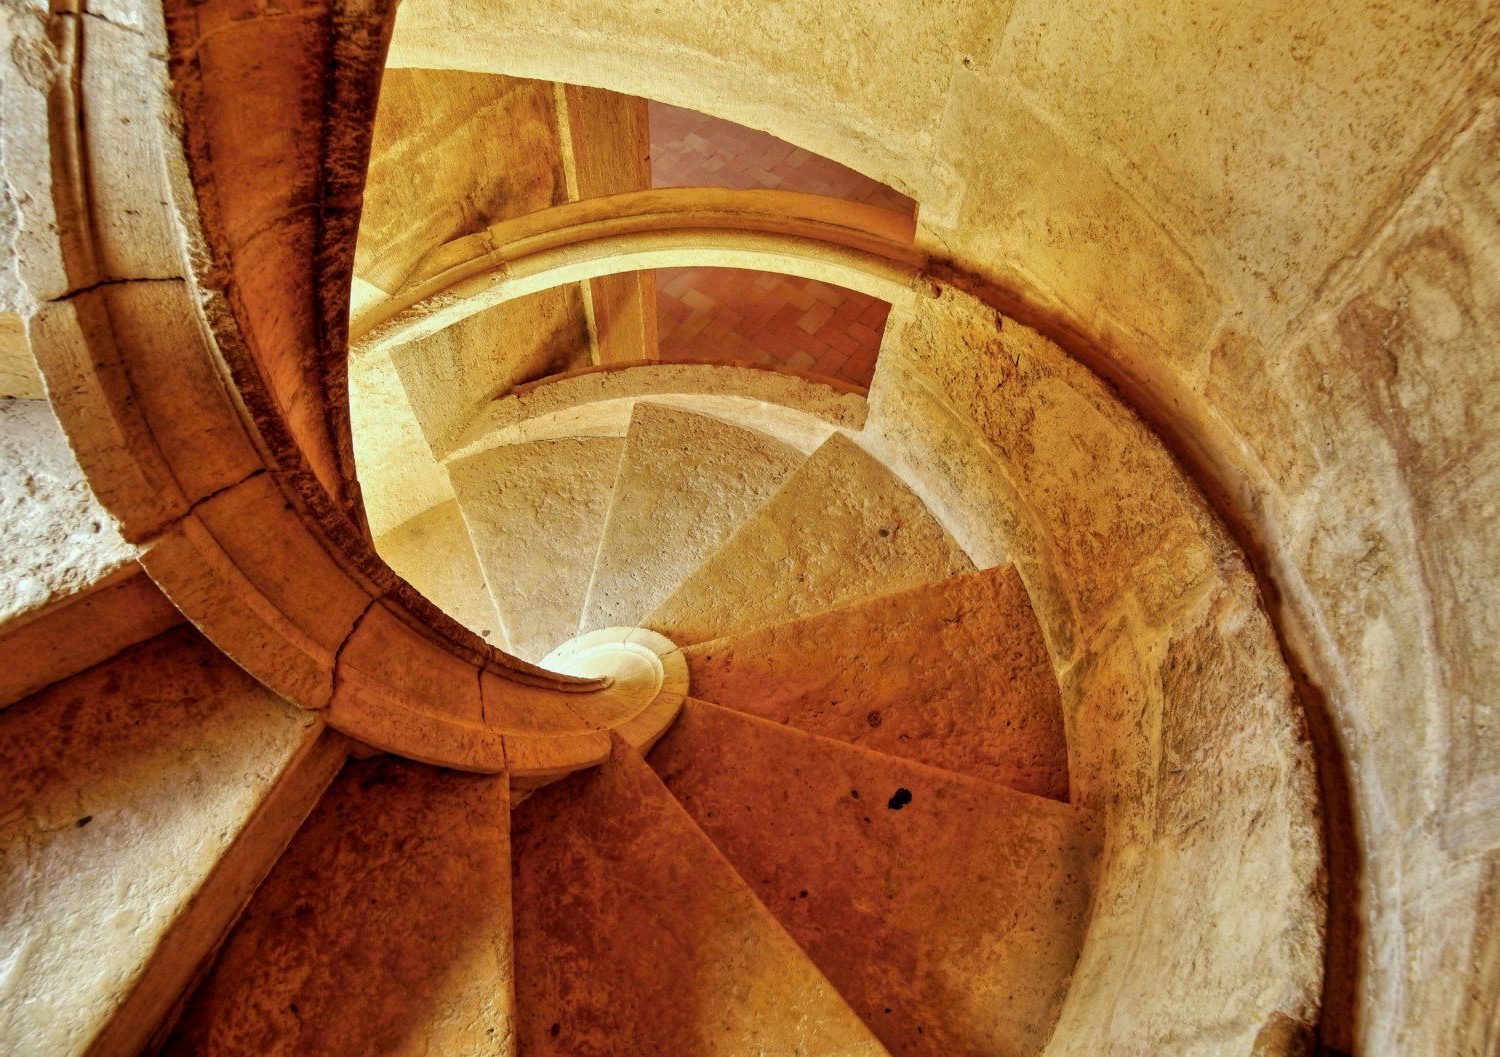 The Clever Reason Medieval Castle Staircases Are Always Clockwise